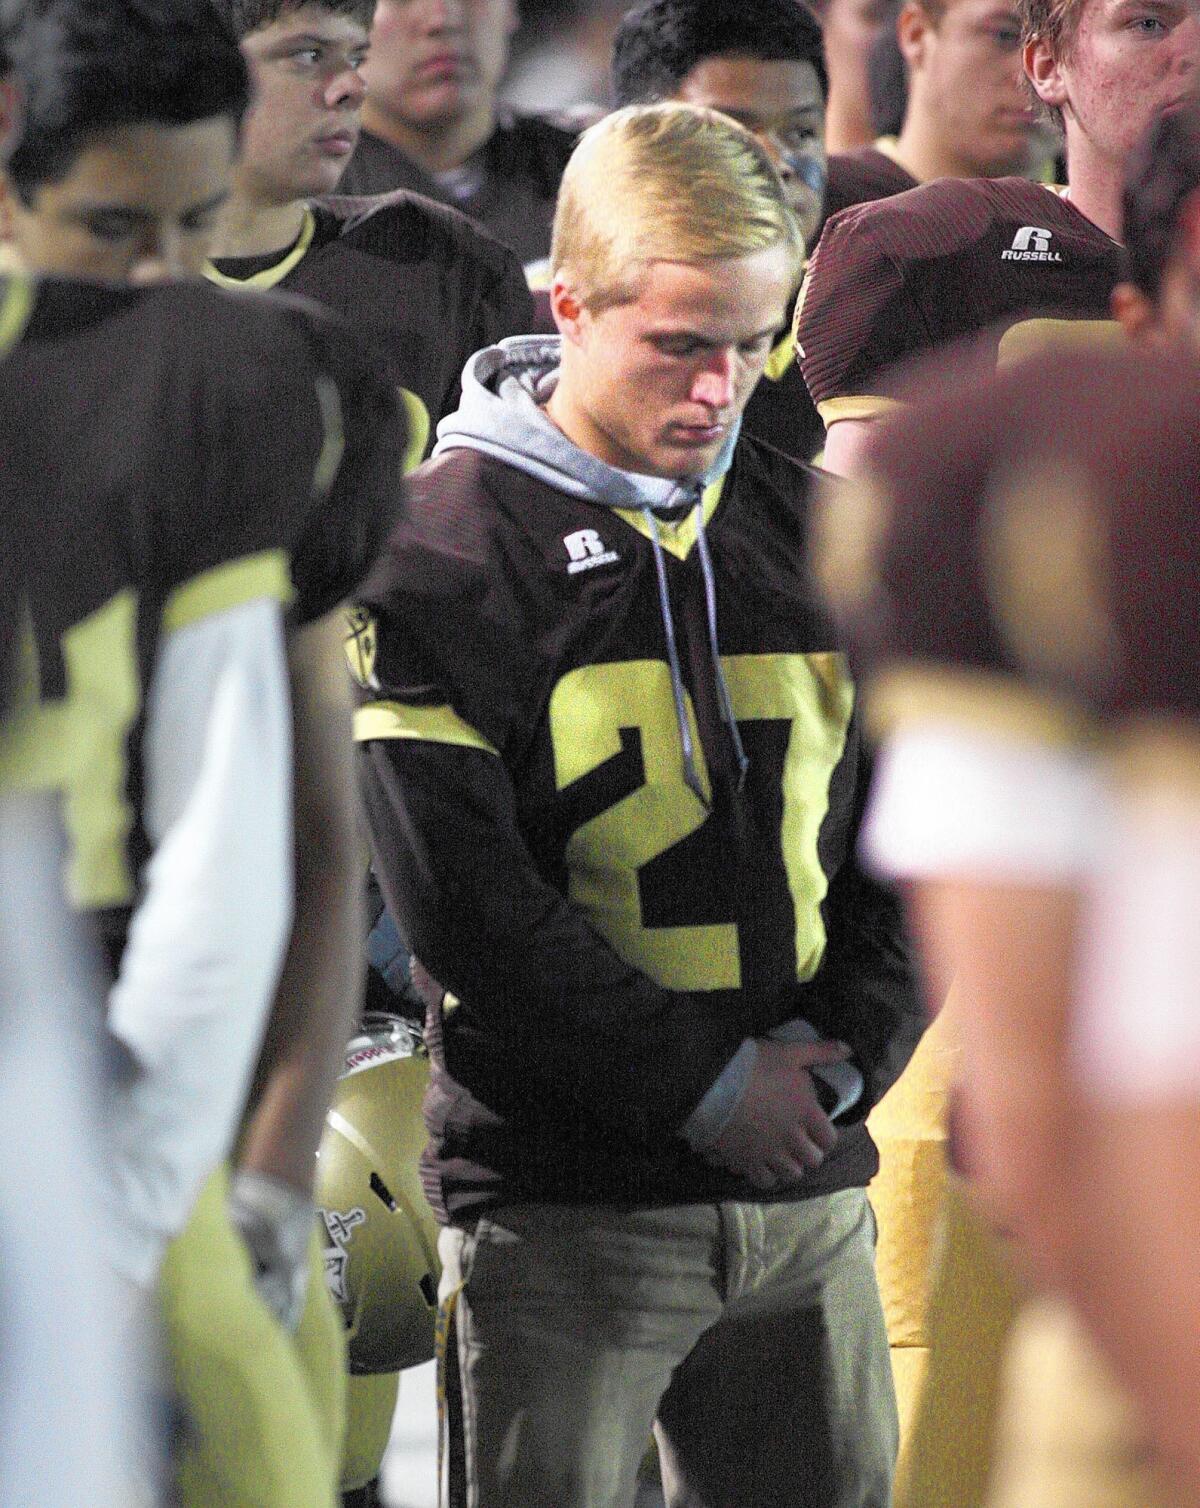 St. Francis' running back Will Huston bows his head during a pregame prayer at the playoff game against La Serna at St. Francis High School. Huston has stopped playing due to cystic fibrosis.